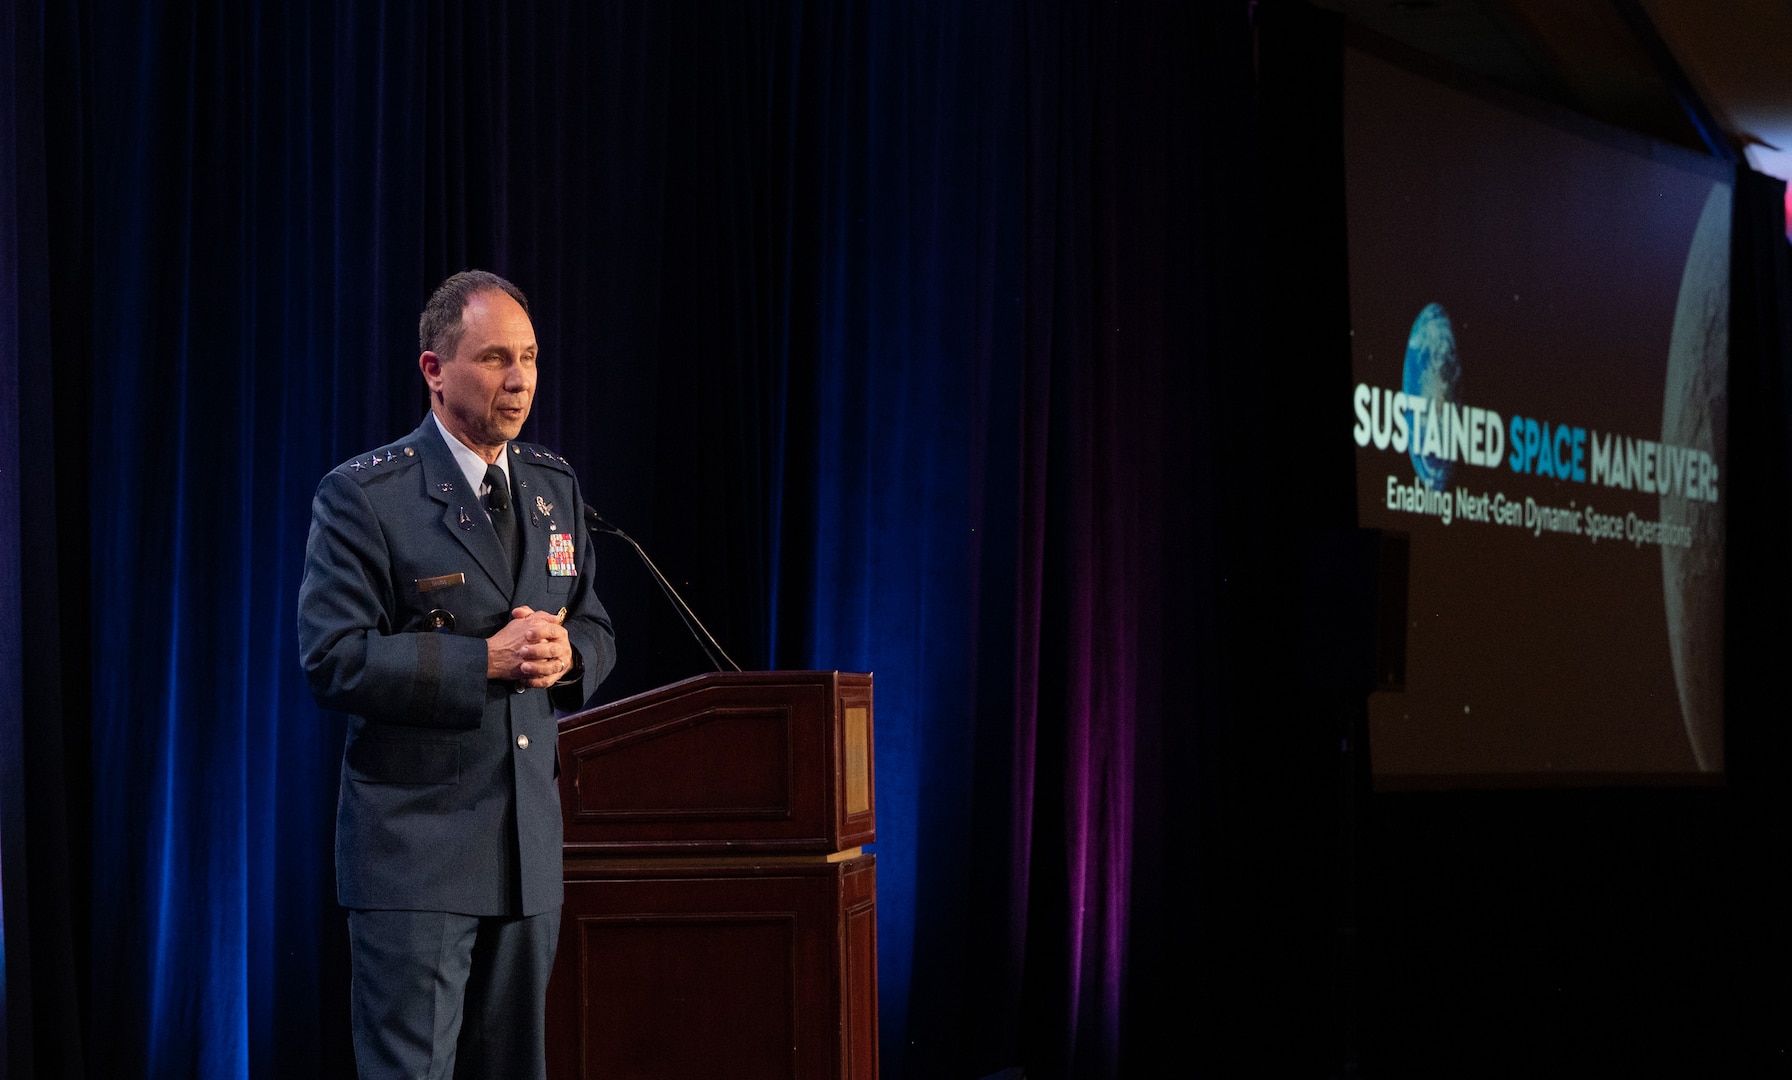 USSPACECOM outlines requirements for sustained maneuver, ‘dynamic space operations’